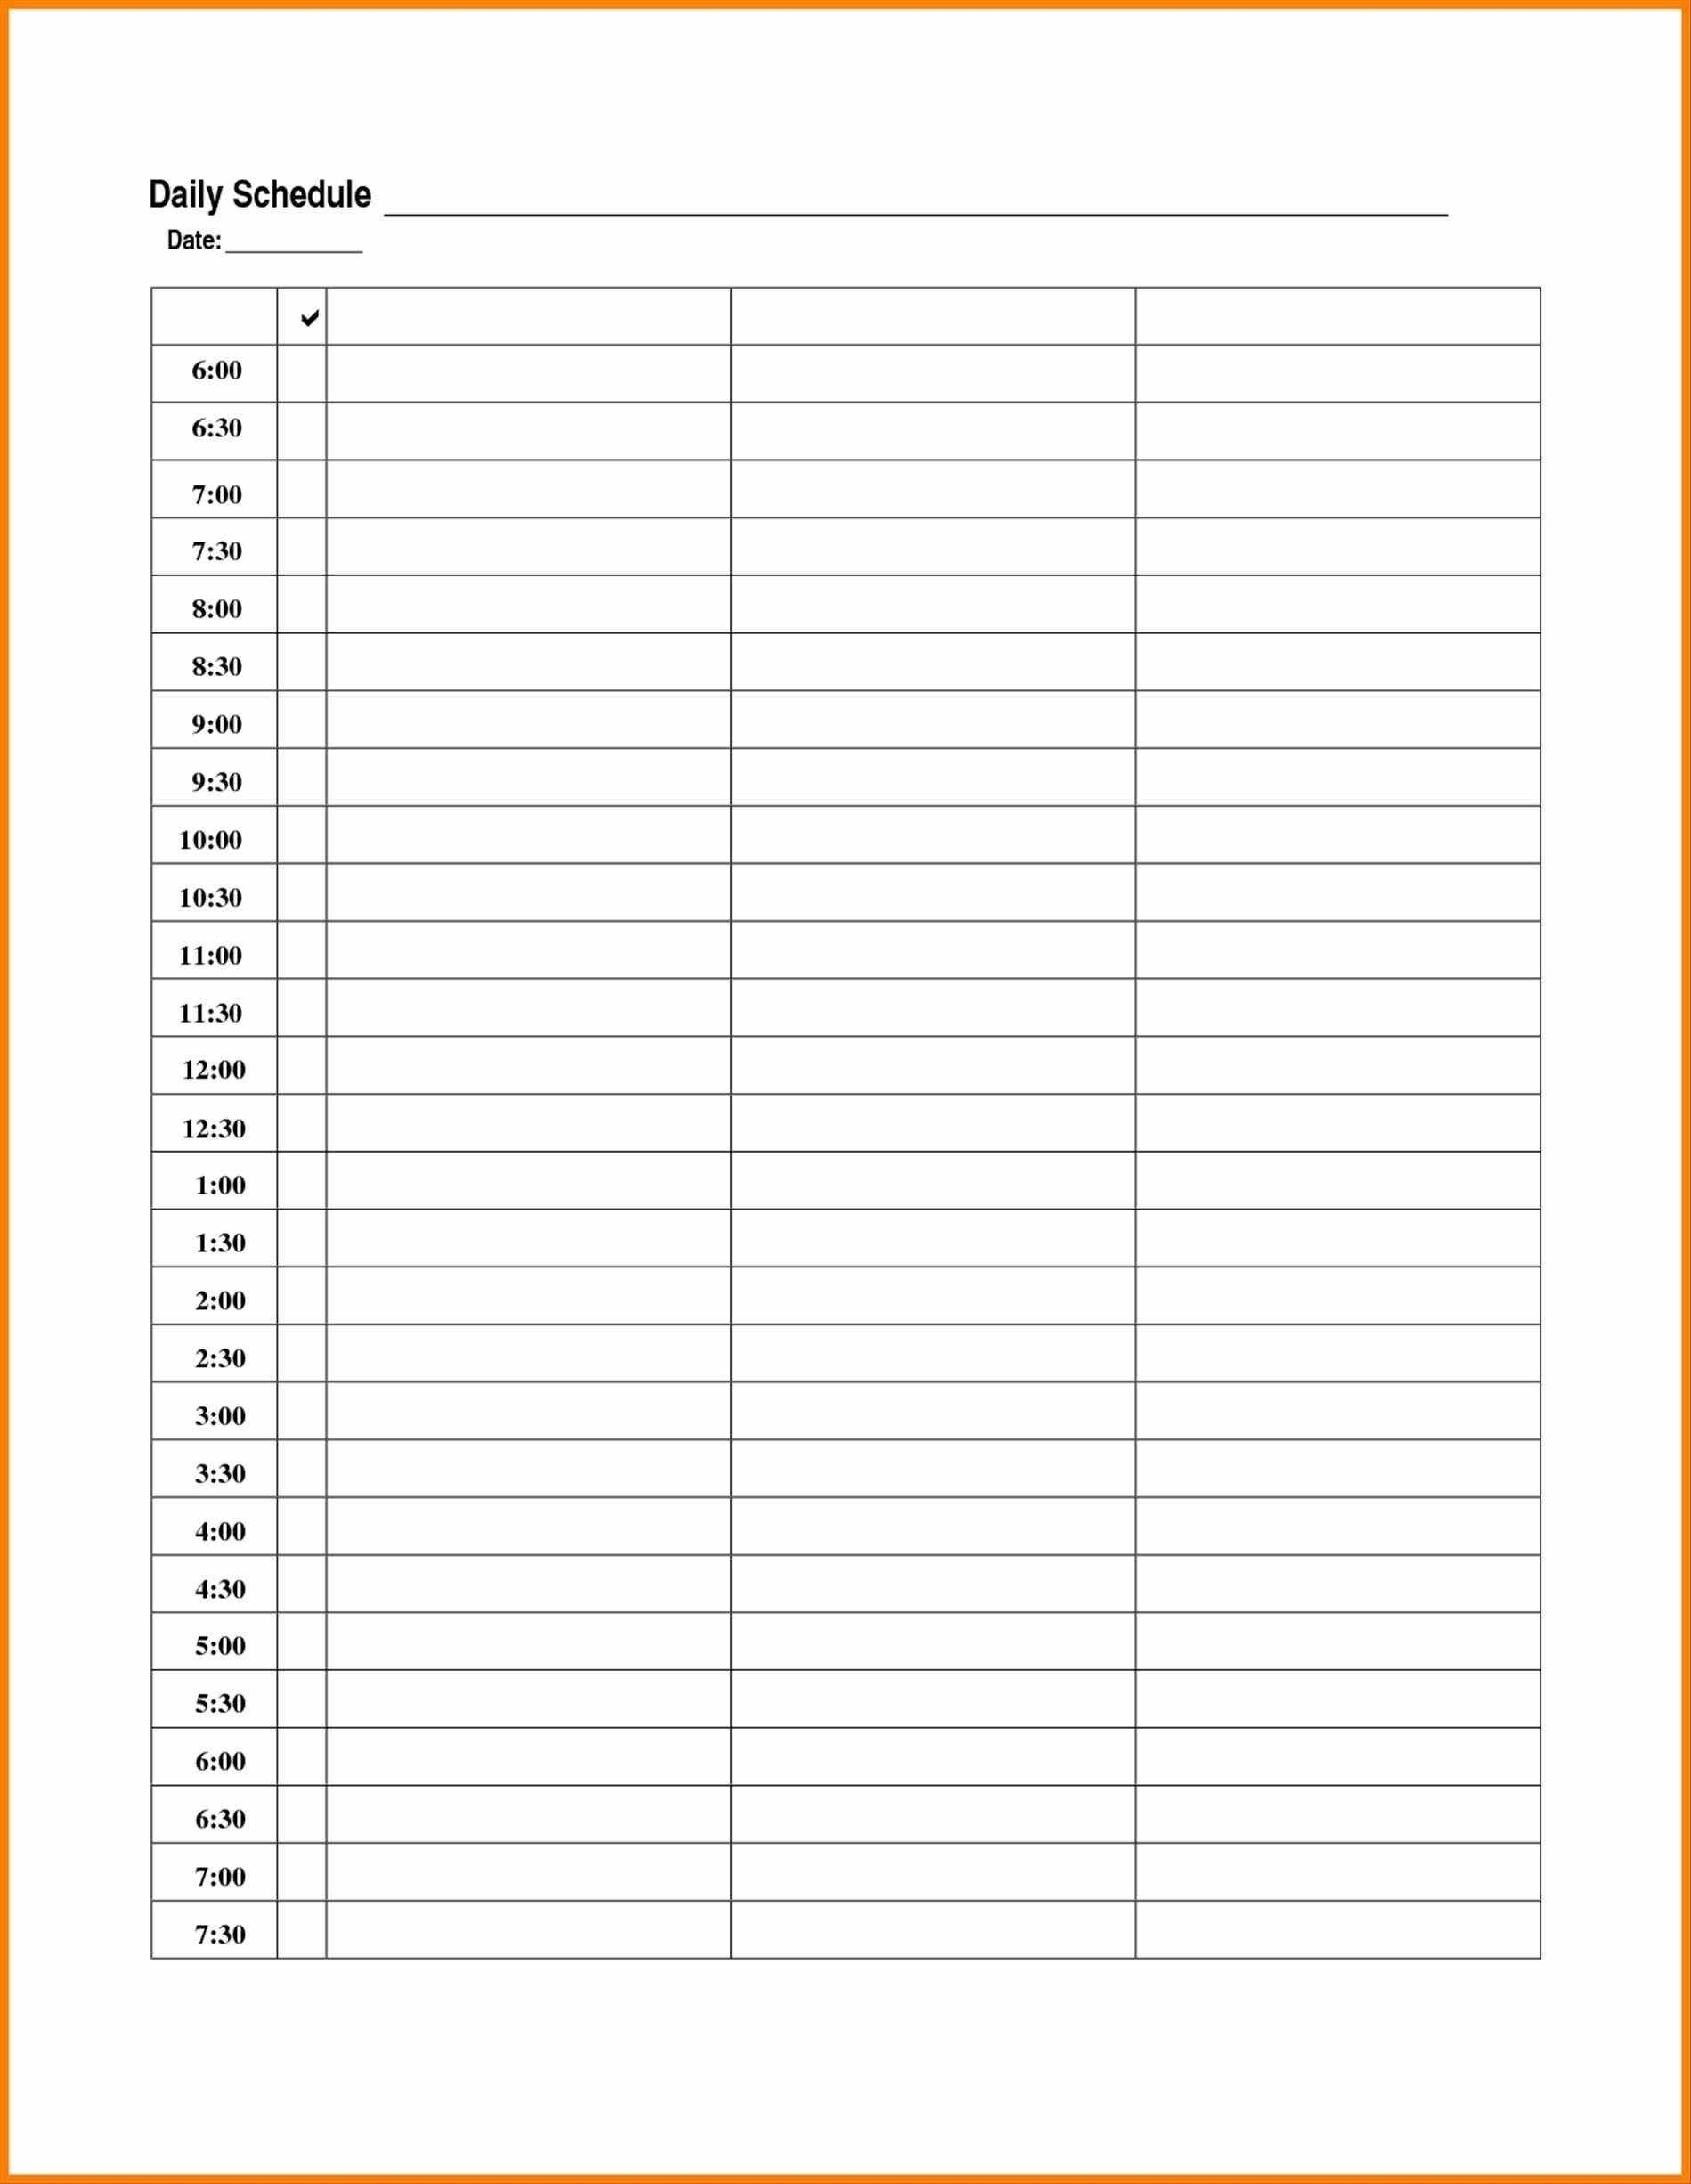 Daily Calendar Excel Template Free Printable | Daily